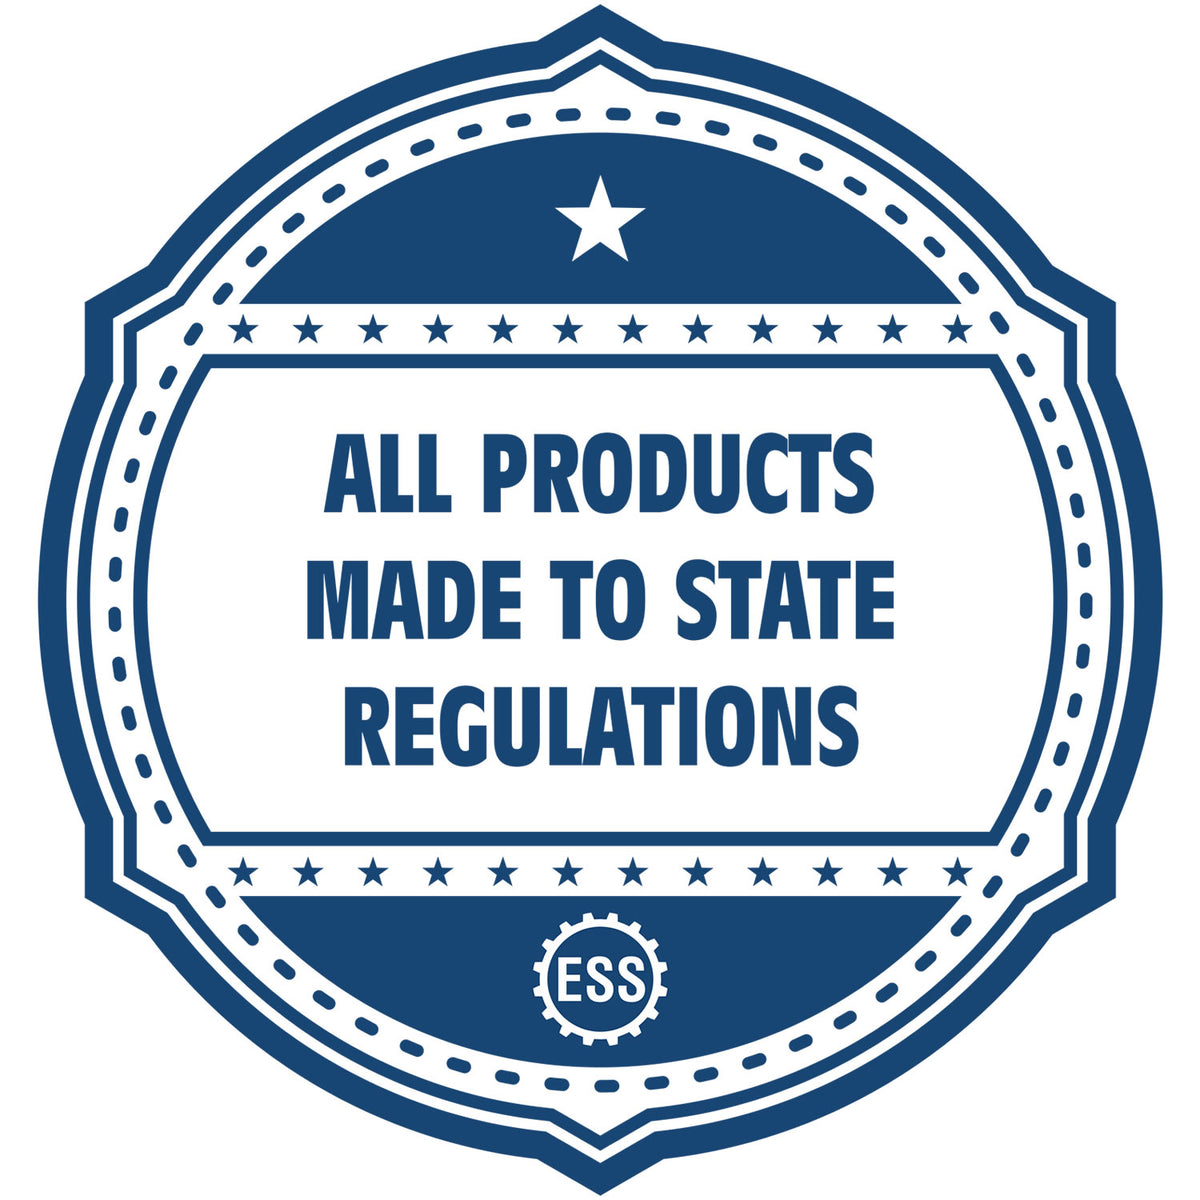 An icon or badge element for the Alaska Professional Engineer Seal Stamp showing that this product is made in compliance with state regulations.